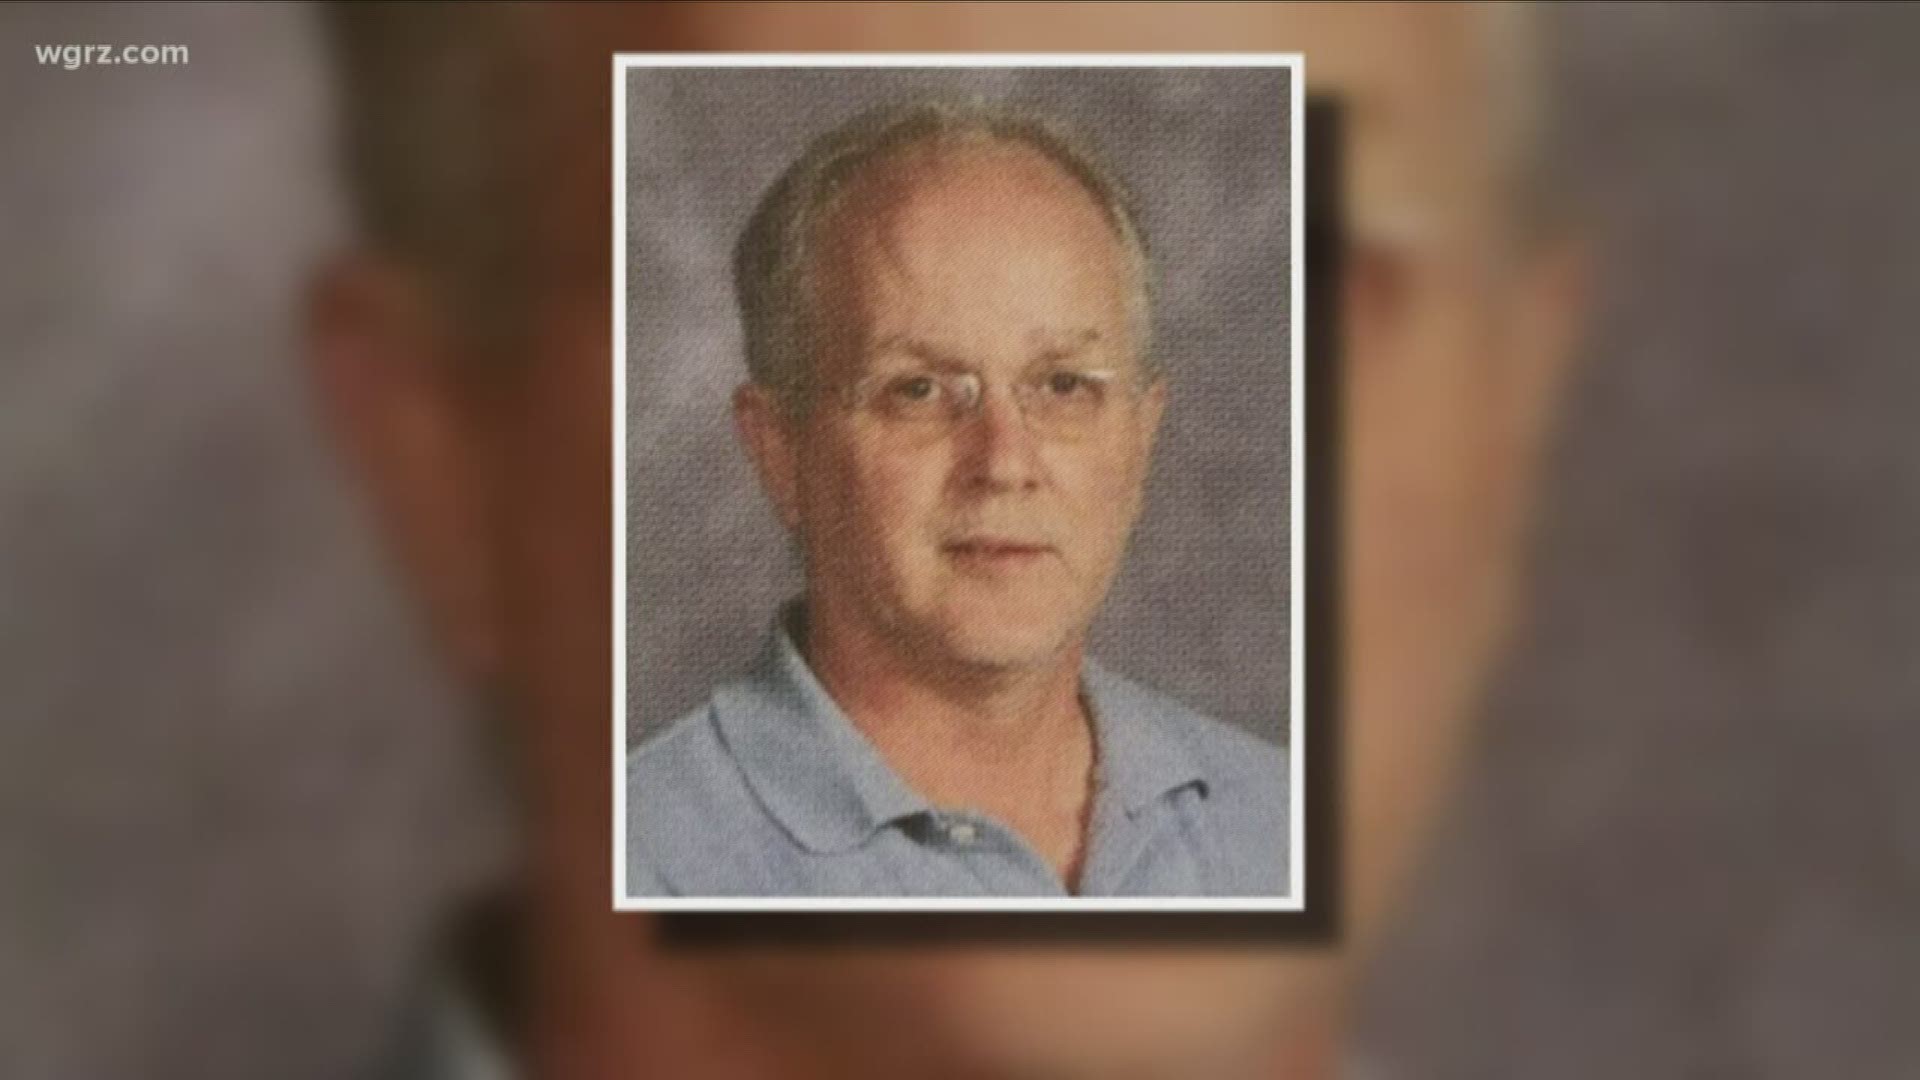 City honors high school is now asking others who may have been a victim of a teacher facing federal child pornography charges.